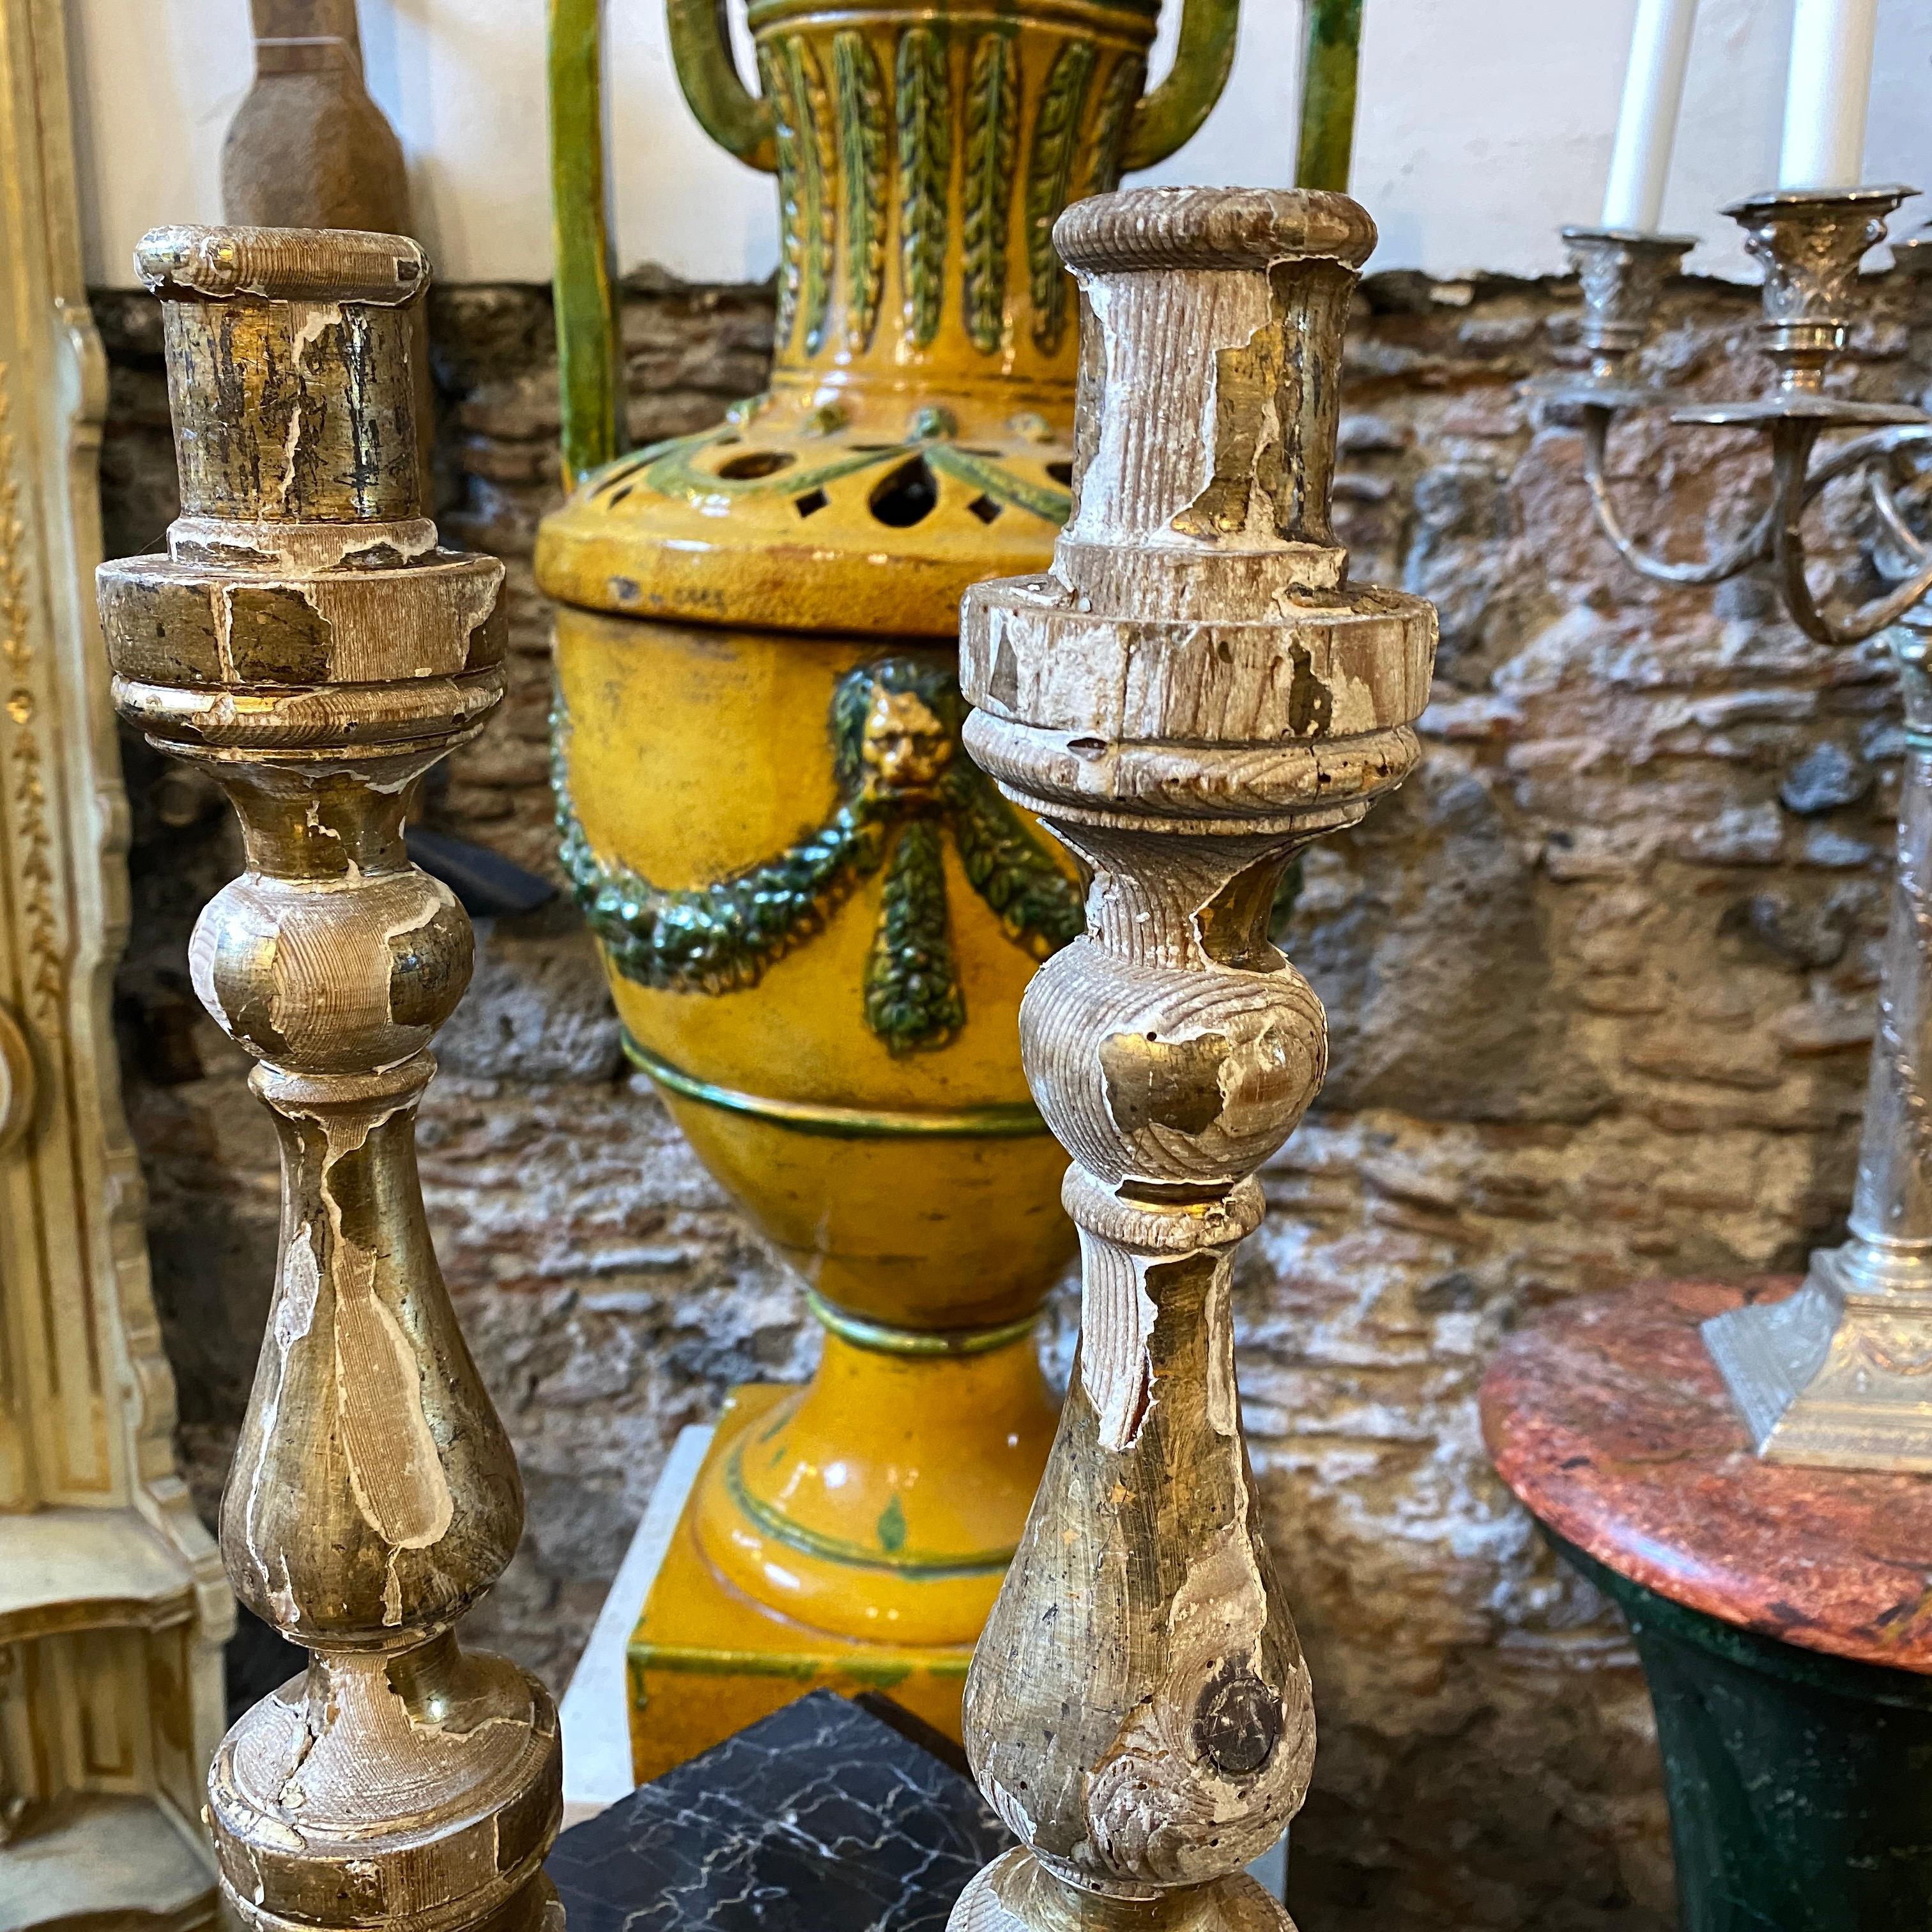 Two original hand-carved Sicilian wood candlesticks made in the mid-19th century, original conditions and patina give them a superb antique look.